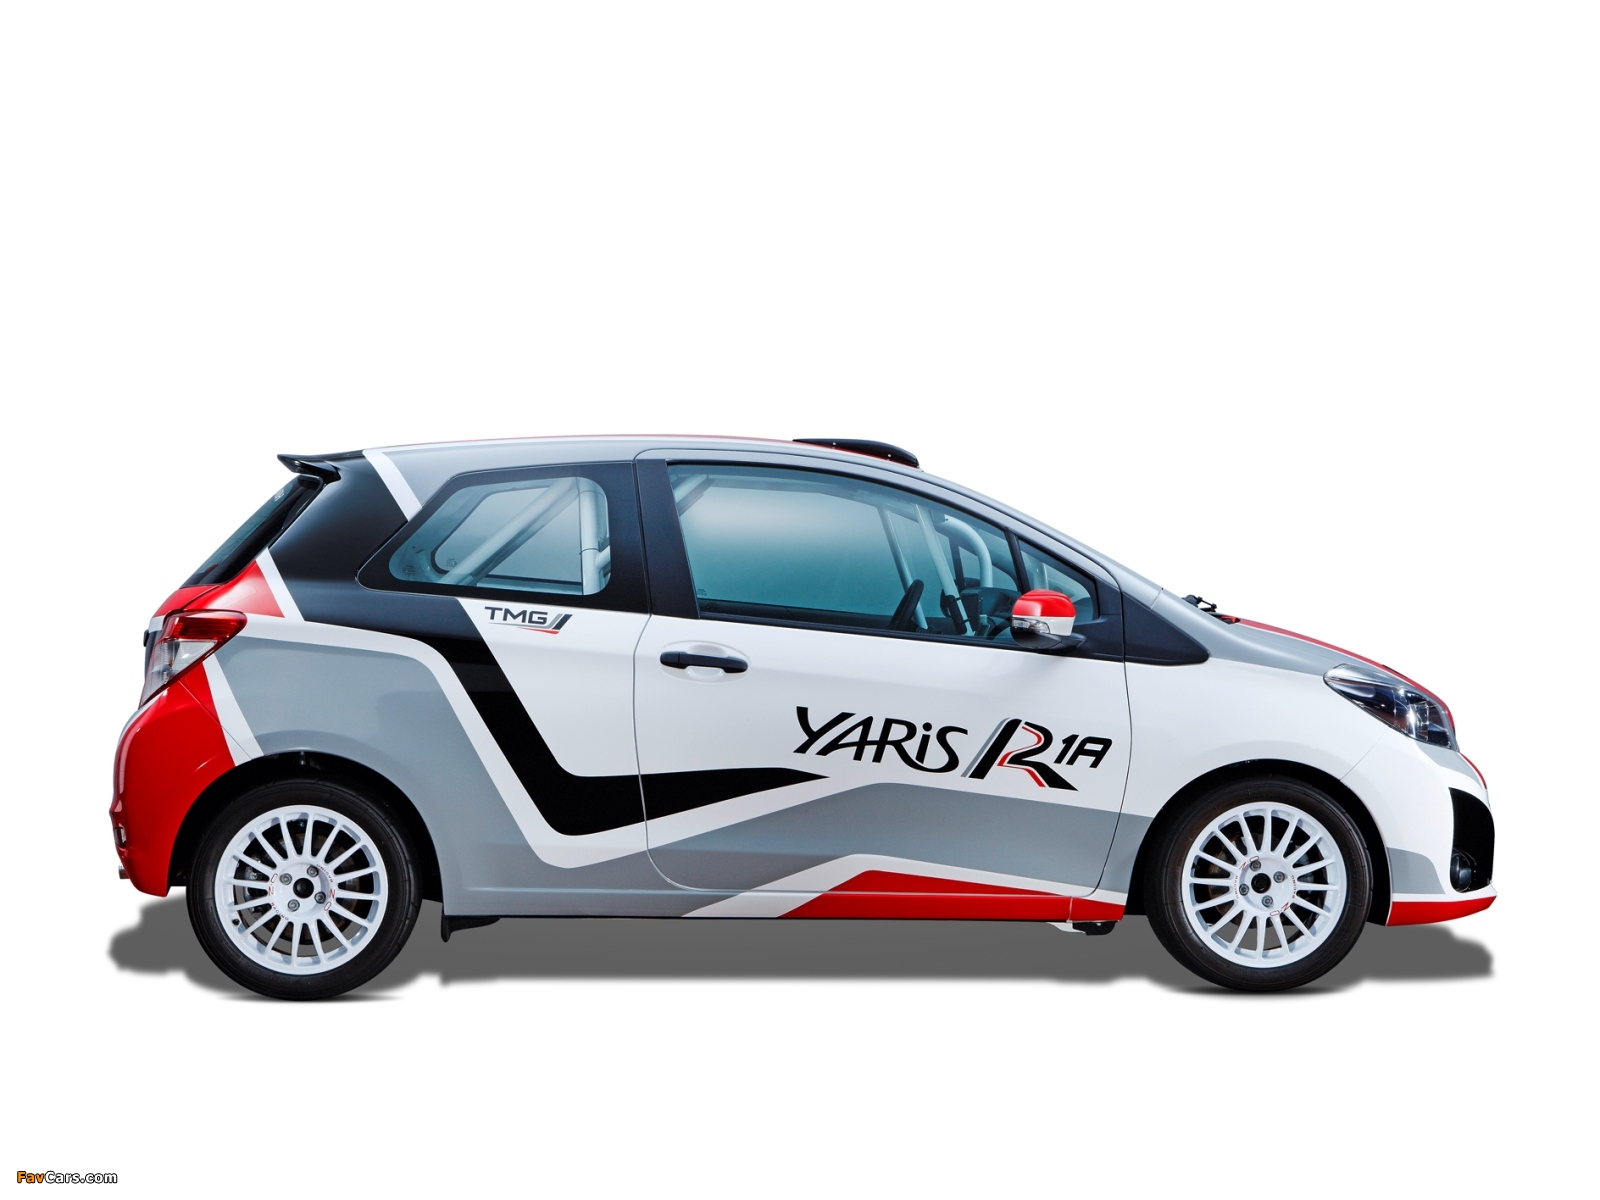 Toyota Yaris R1A Rally Car 2012 pictures (1600 x 1200)